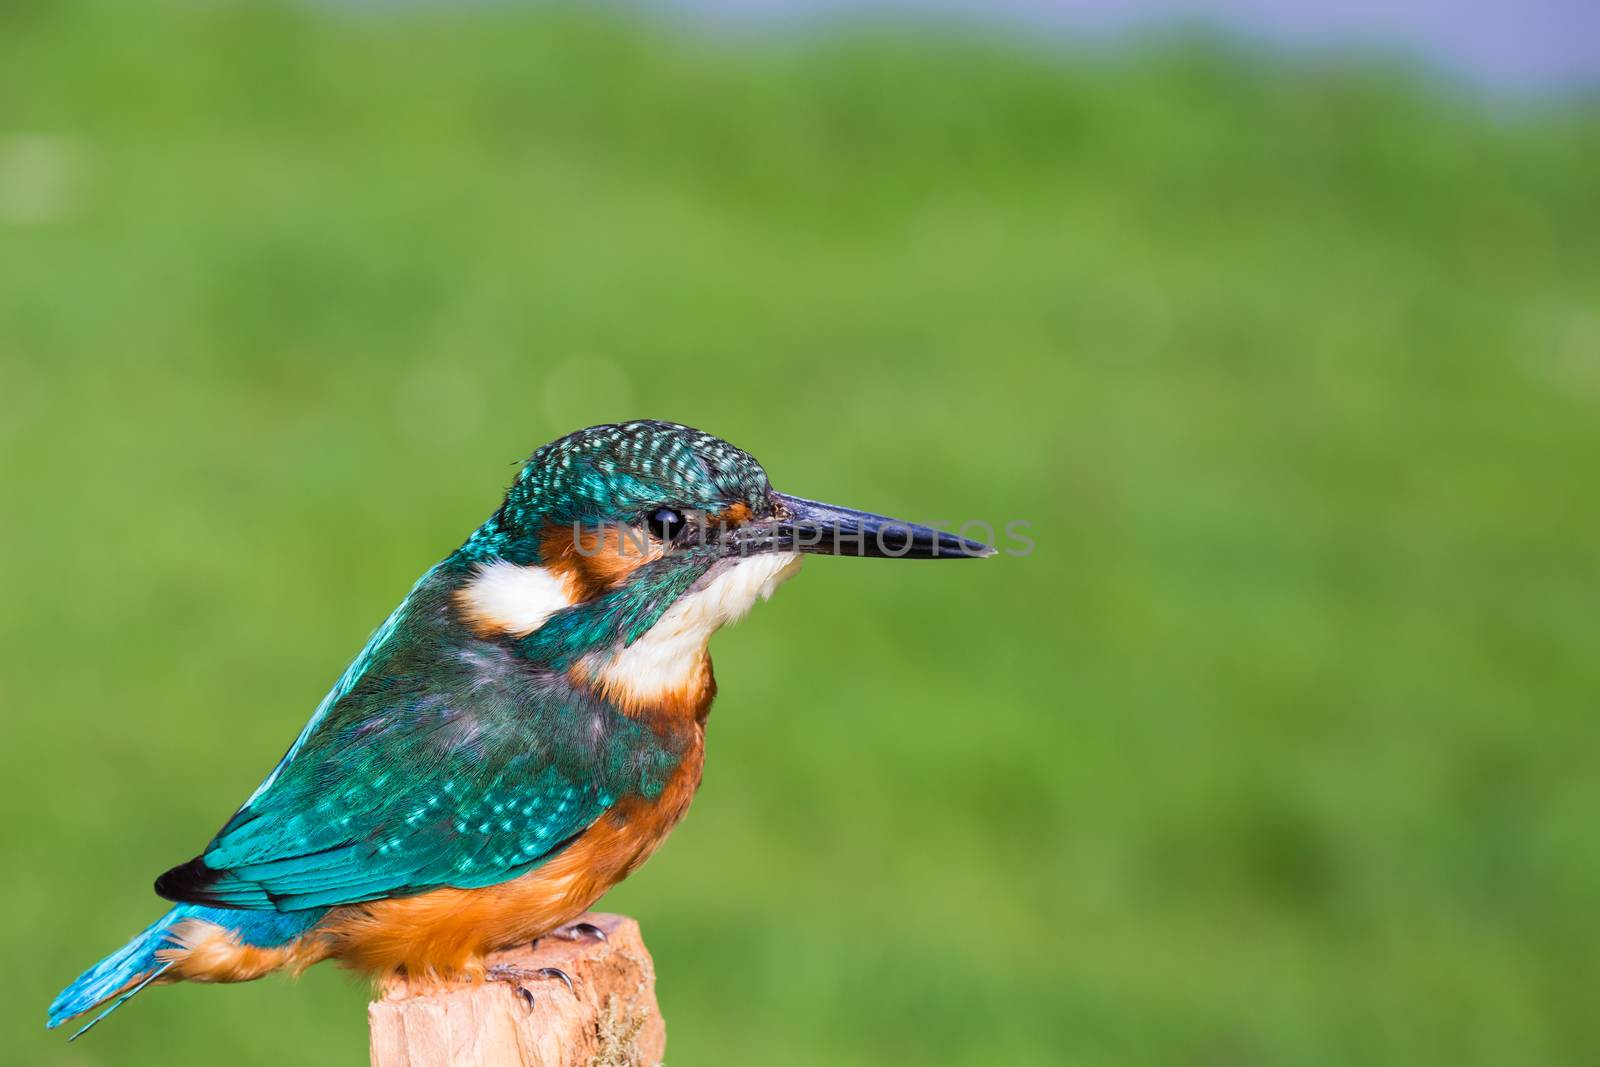 European kingfisher in front of green grass by BenSchonewille